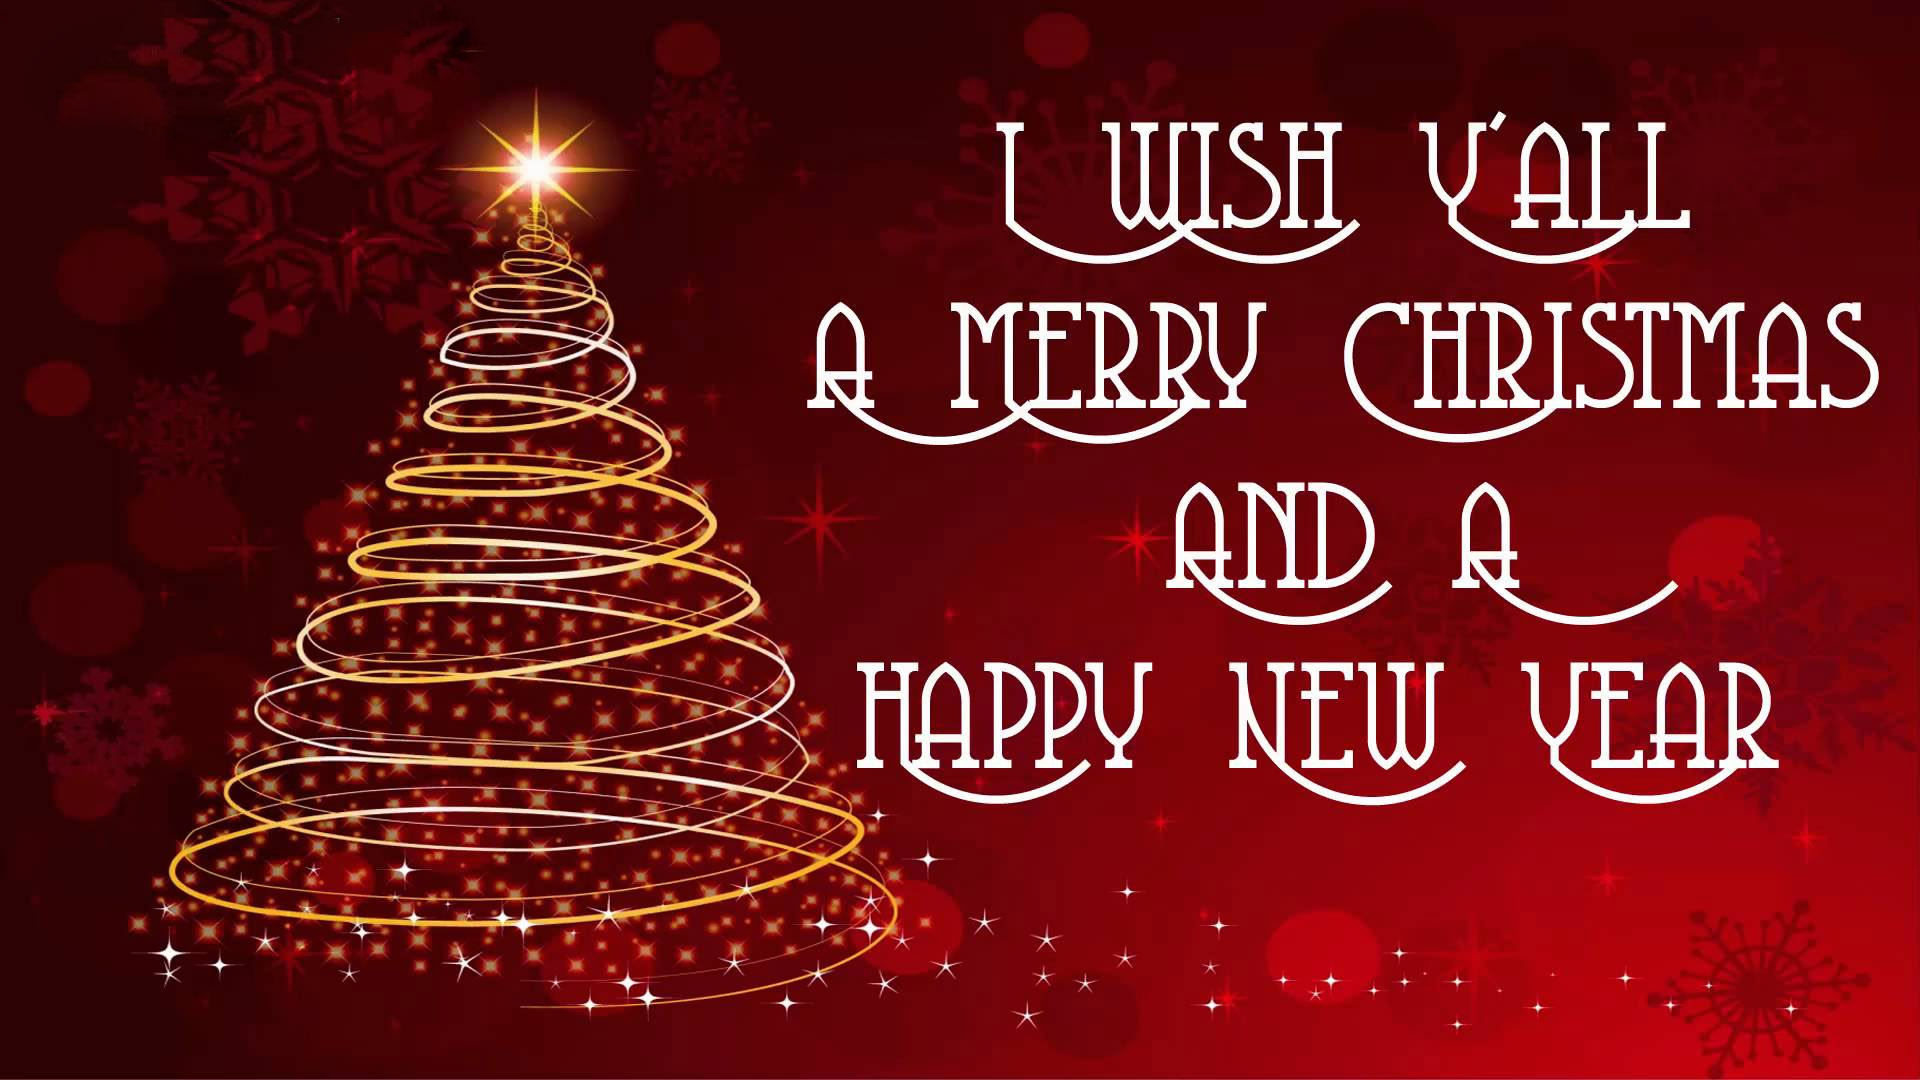 Christmas And New Year Images Free Download